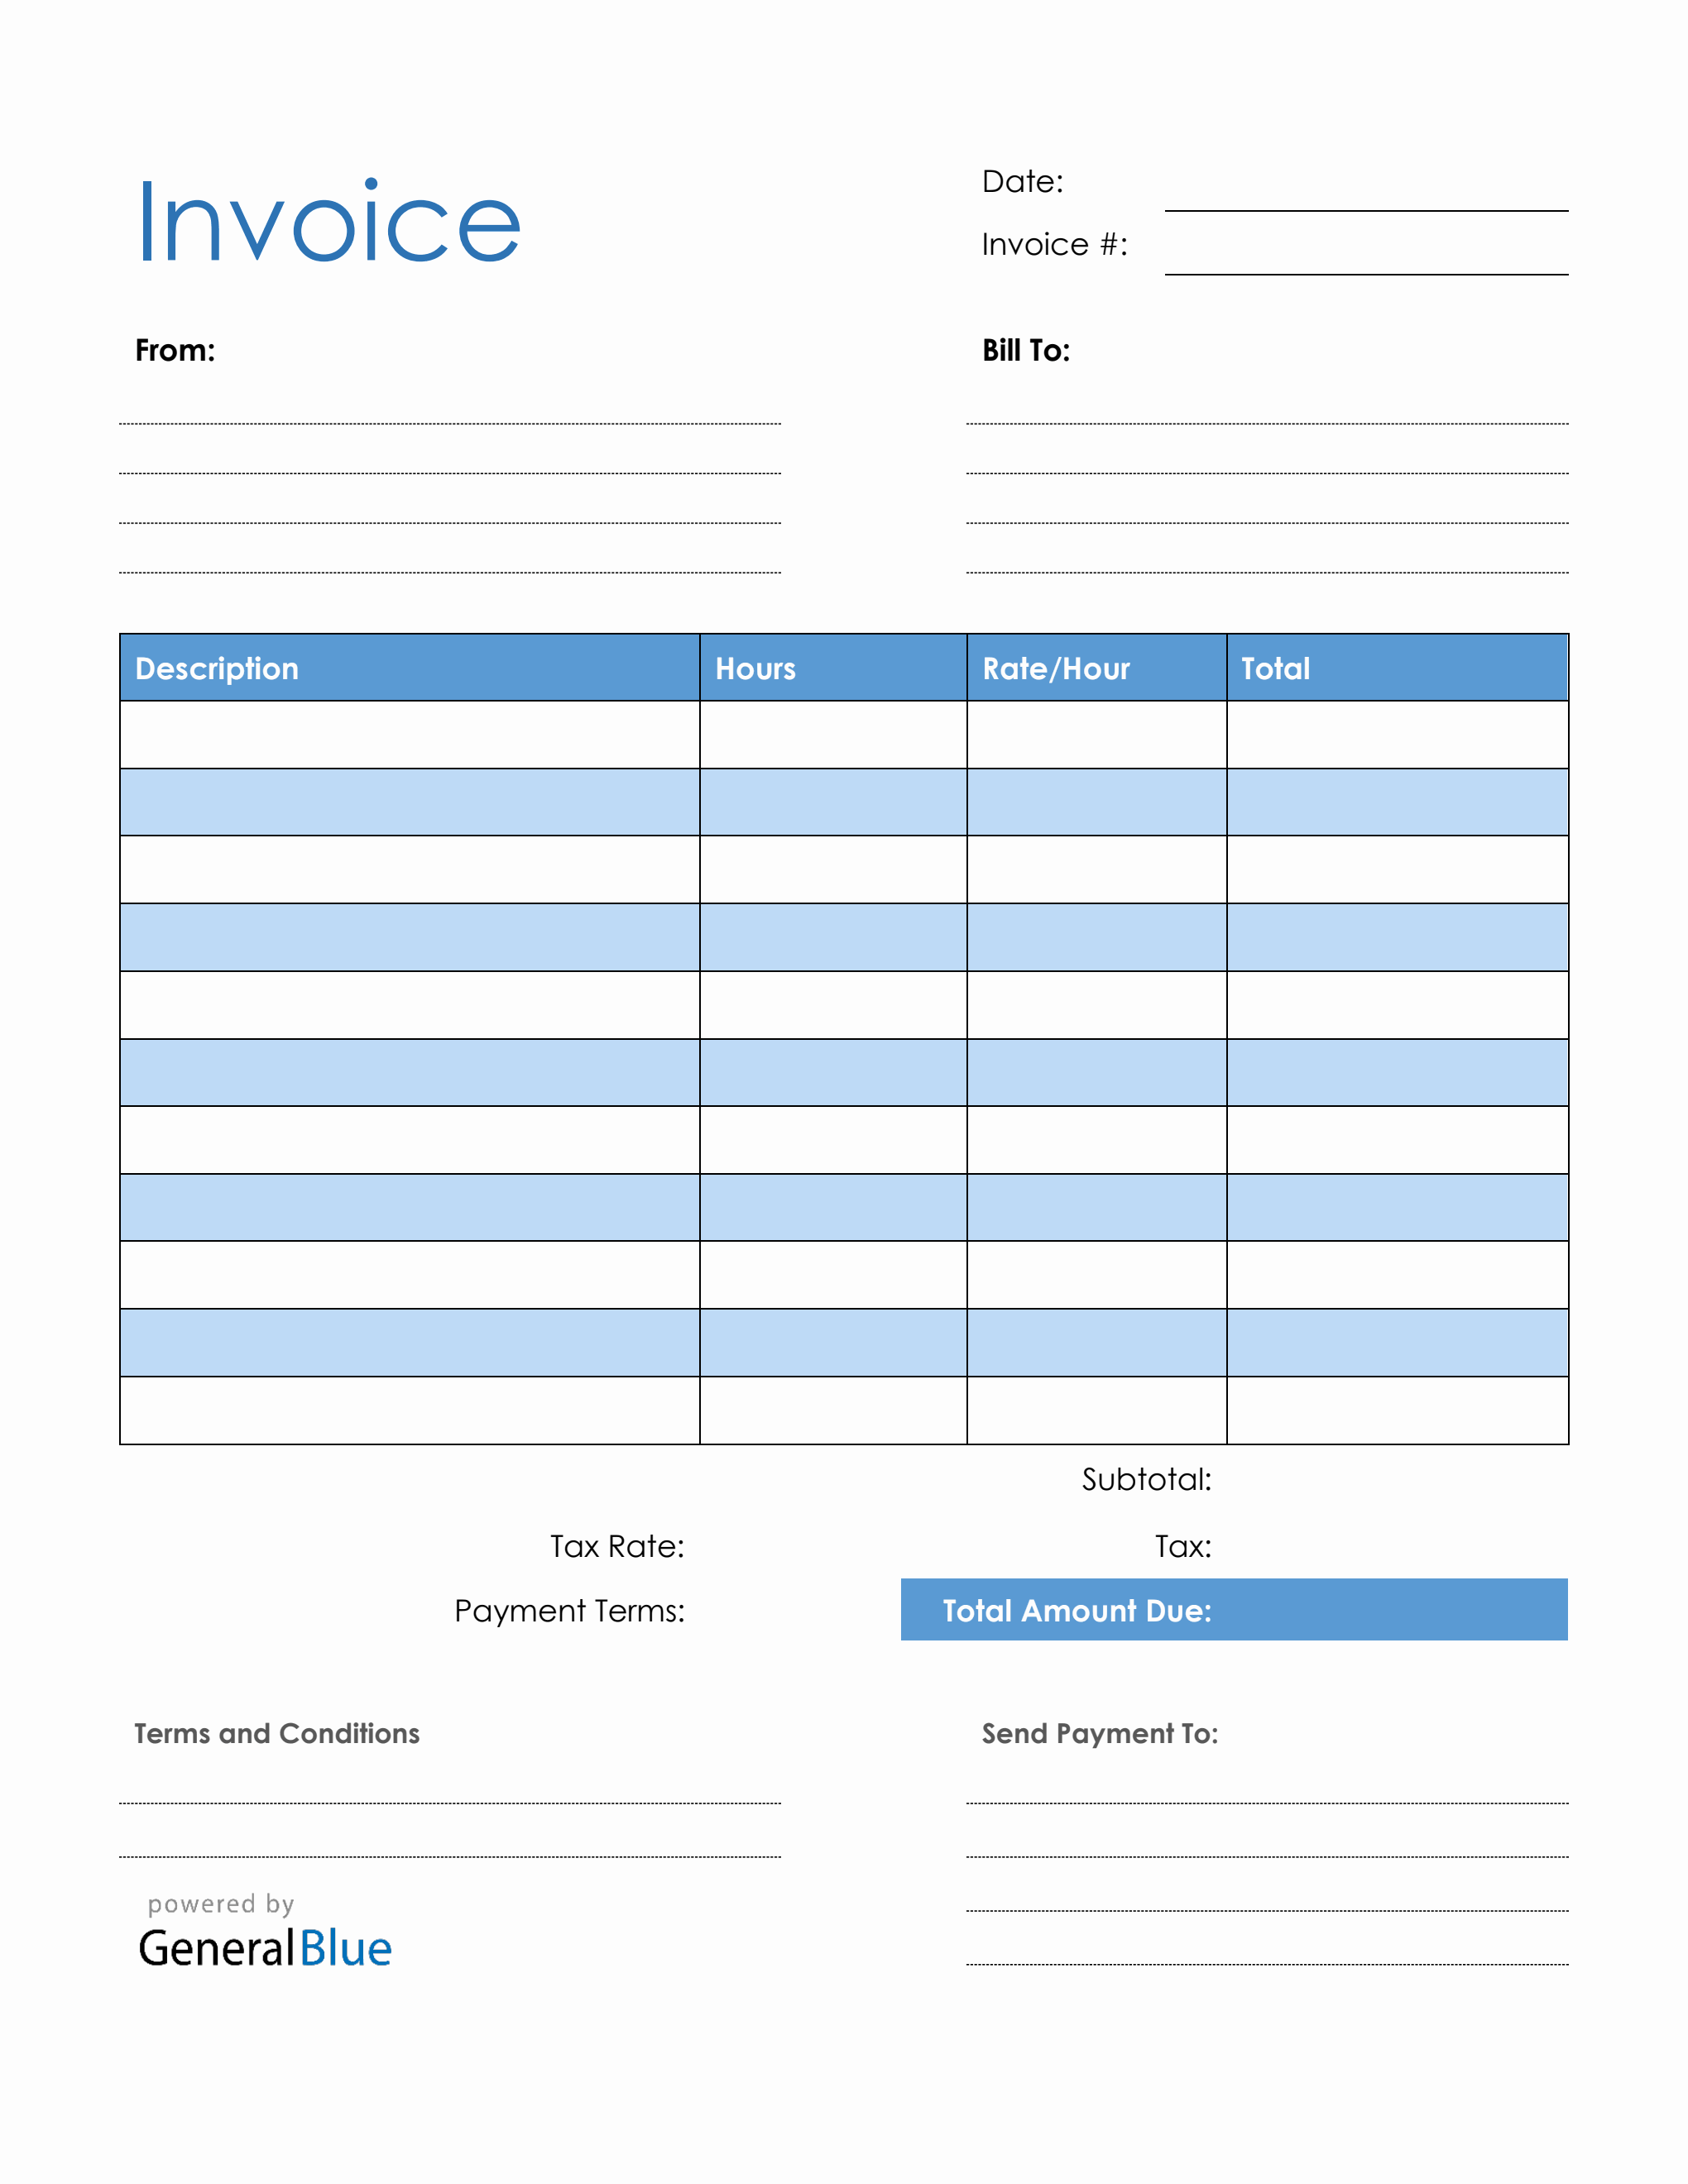 Blank Invoice Template Free Printable ProjectOpenLetter